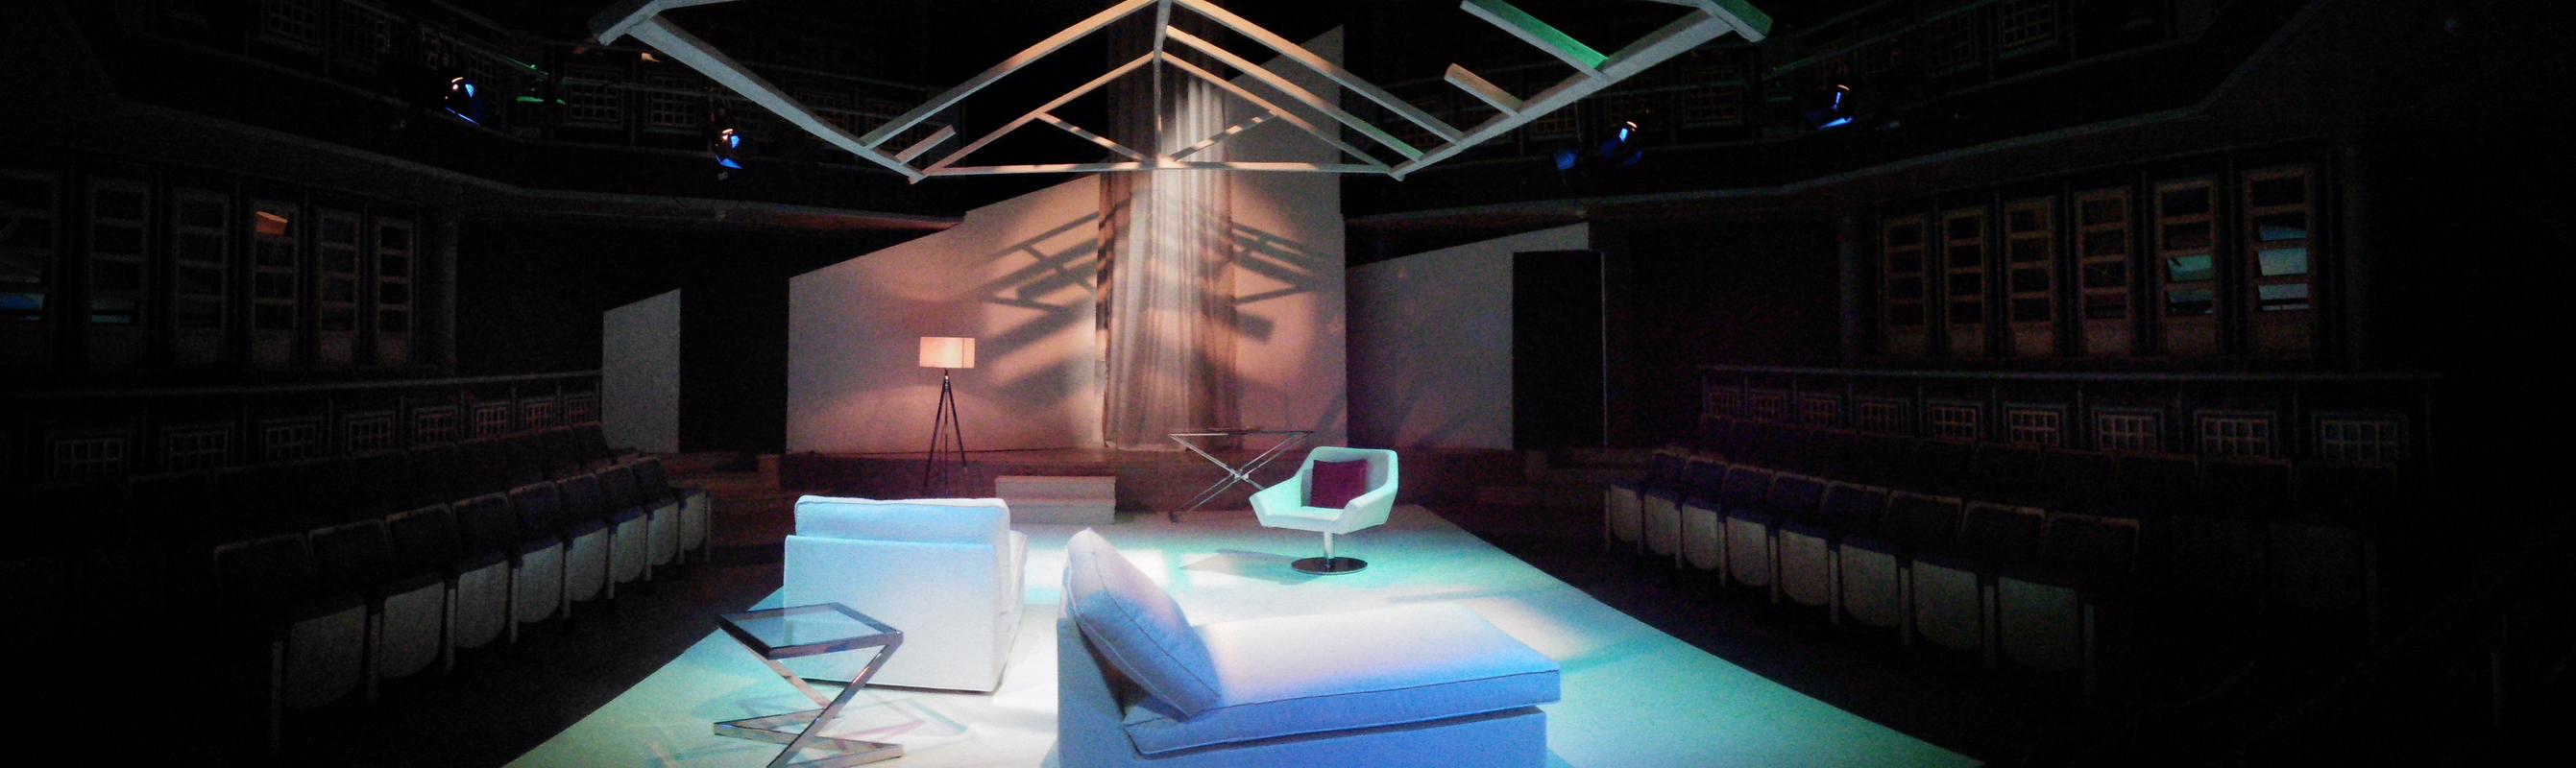 Photograph from Old Times - lighting design by Chris Gatt